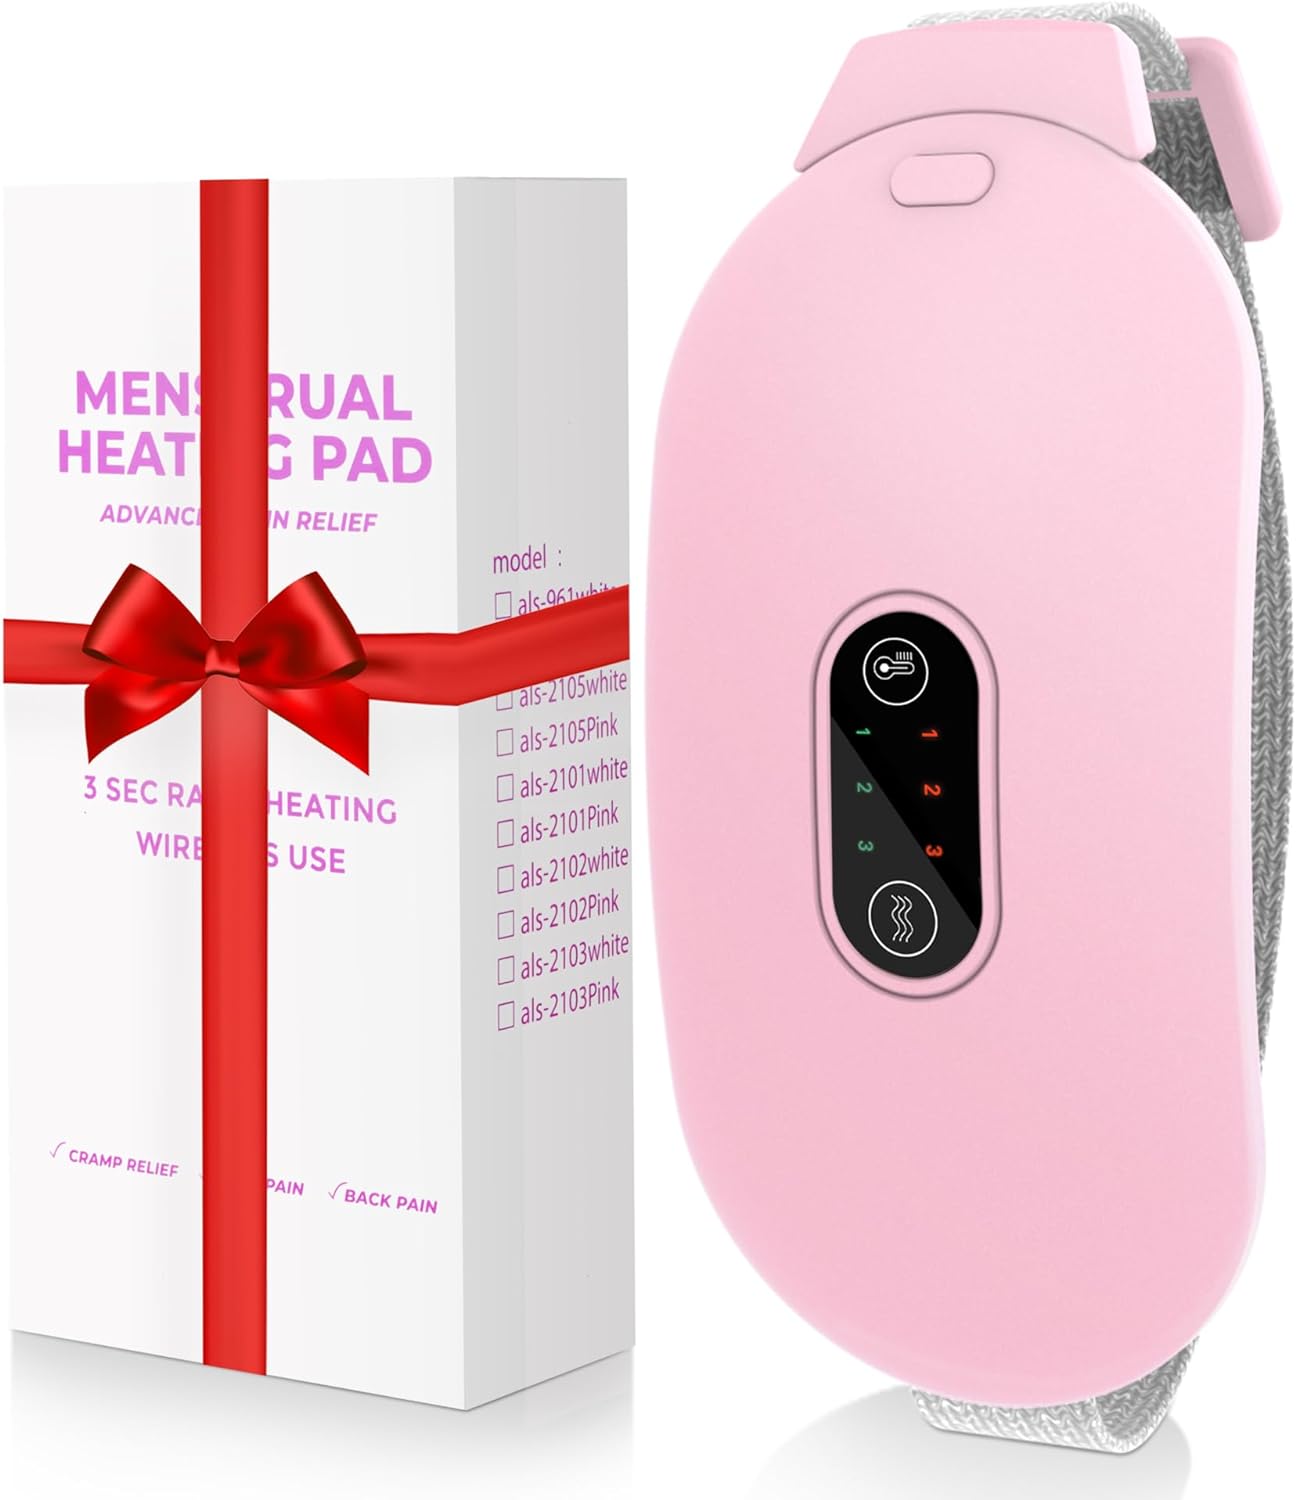 I didnt think it would get that hot but it actually heats up pretty well and is so great for cramps. Love the vibrating feature as well.